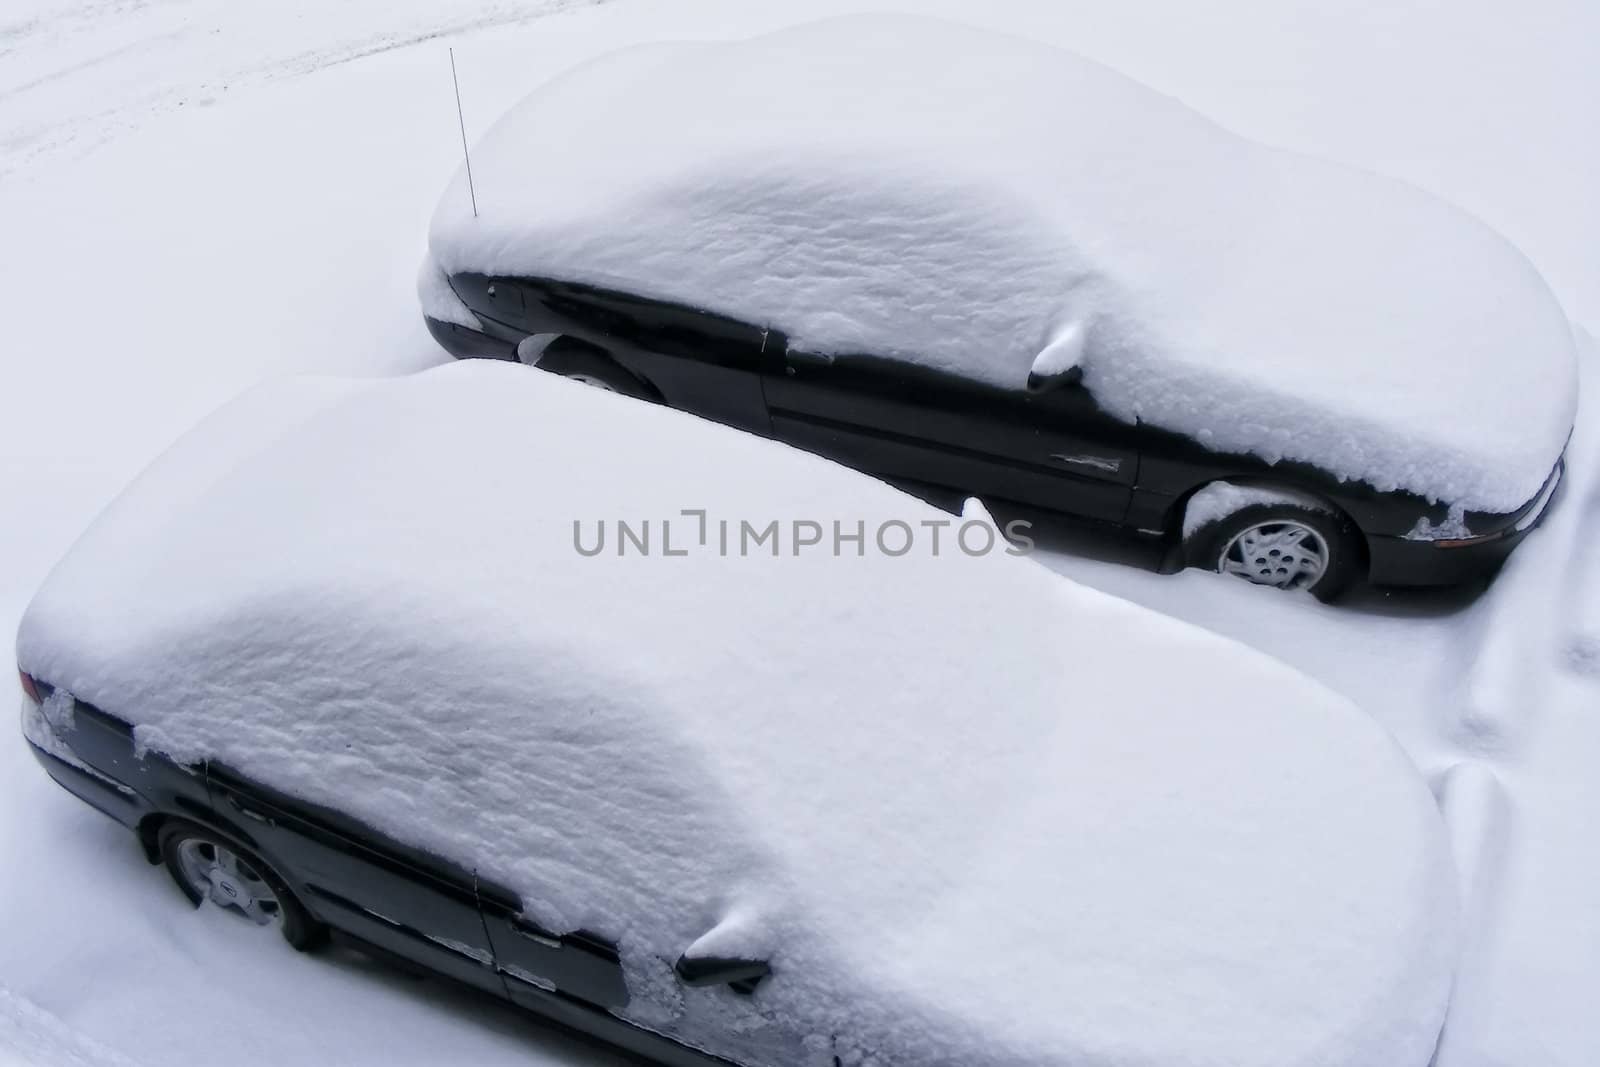 Cars buried in snow after heavey snowfall.